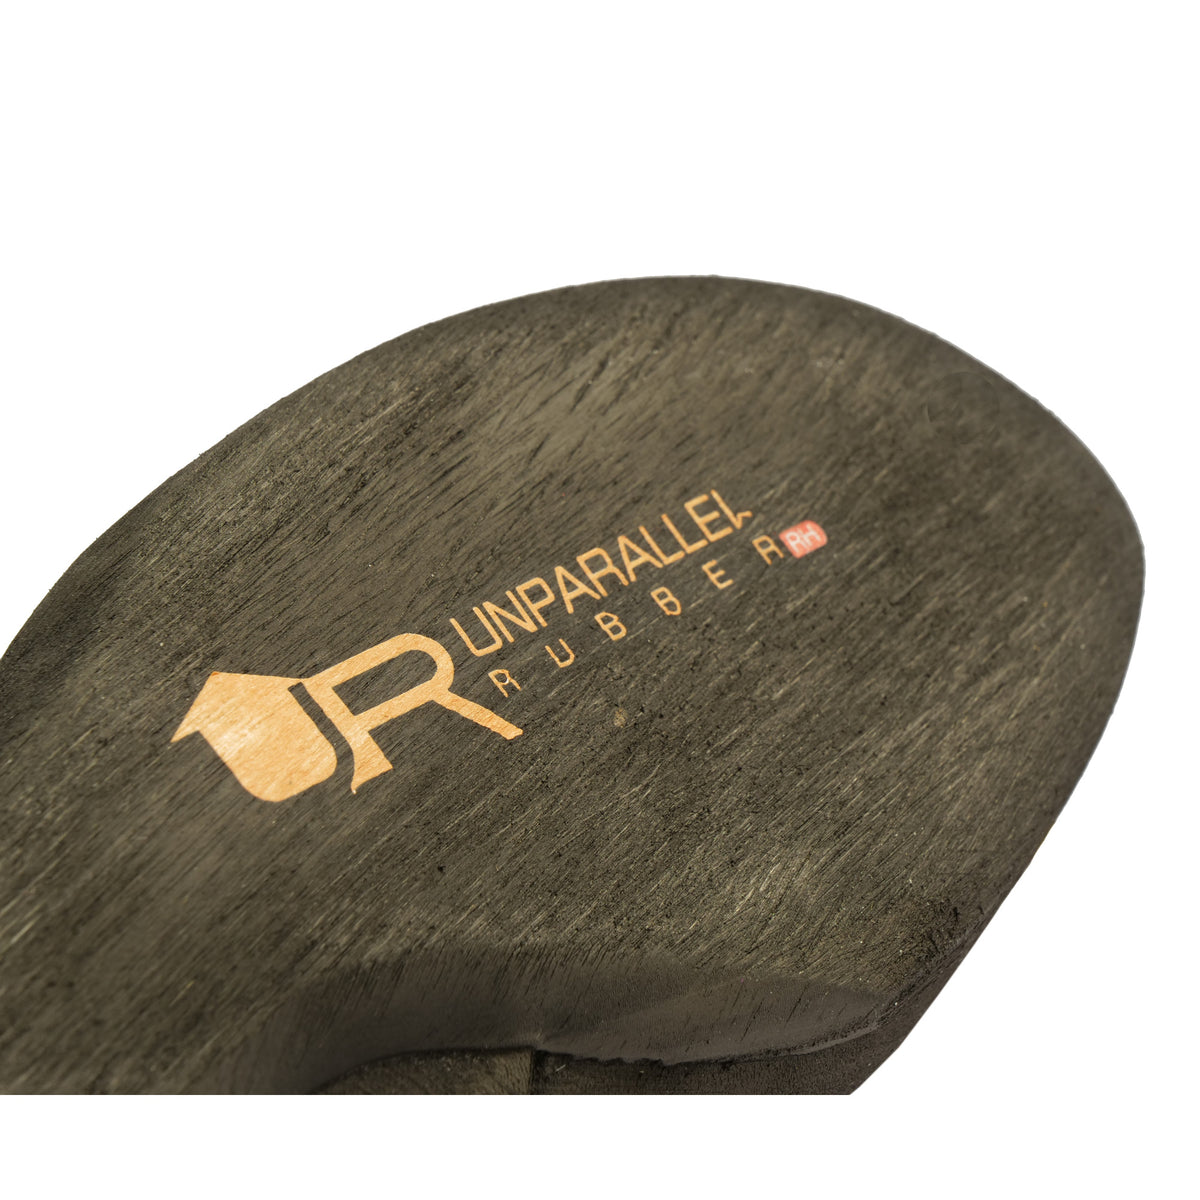 Unparallels Real hard compound sole rubber in black